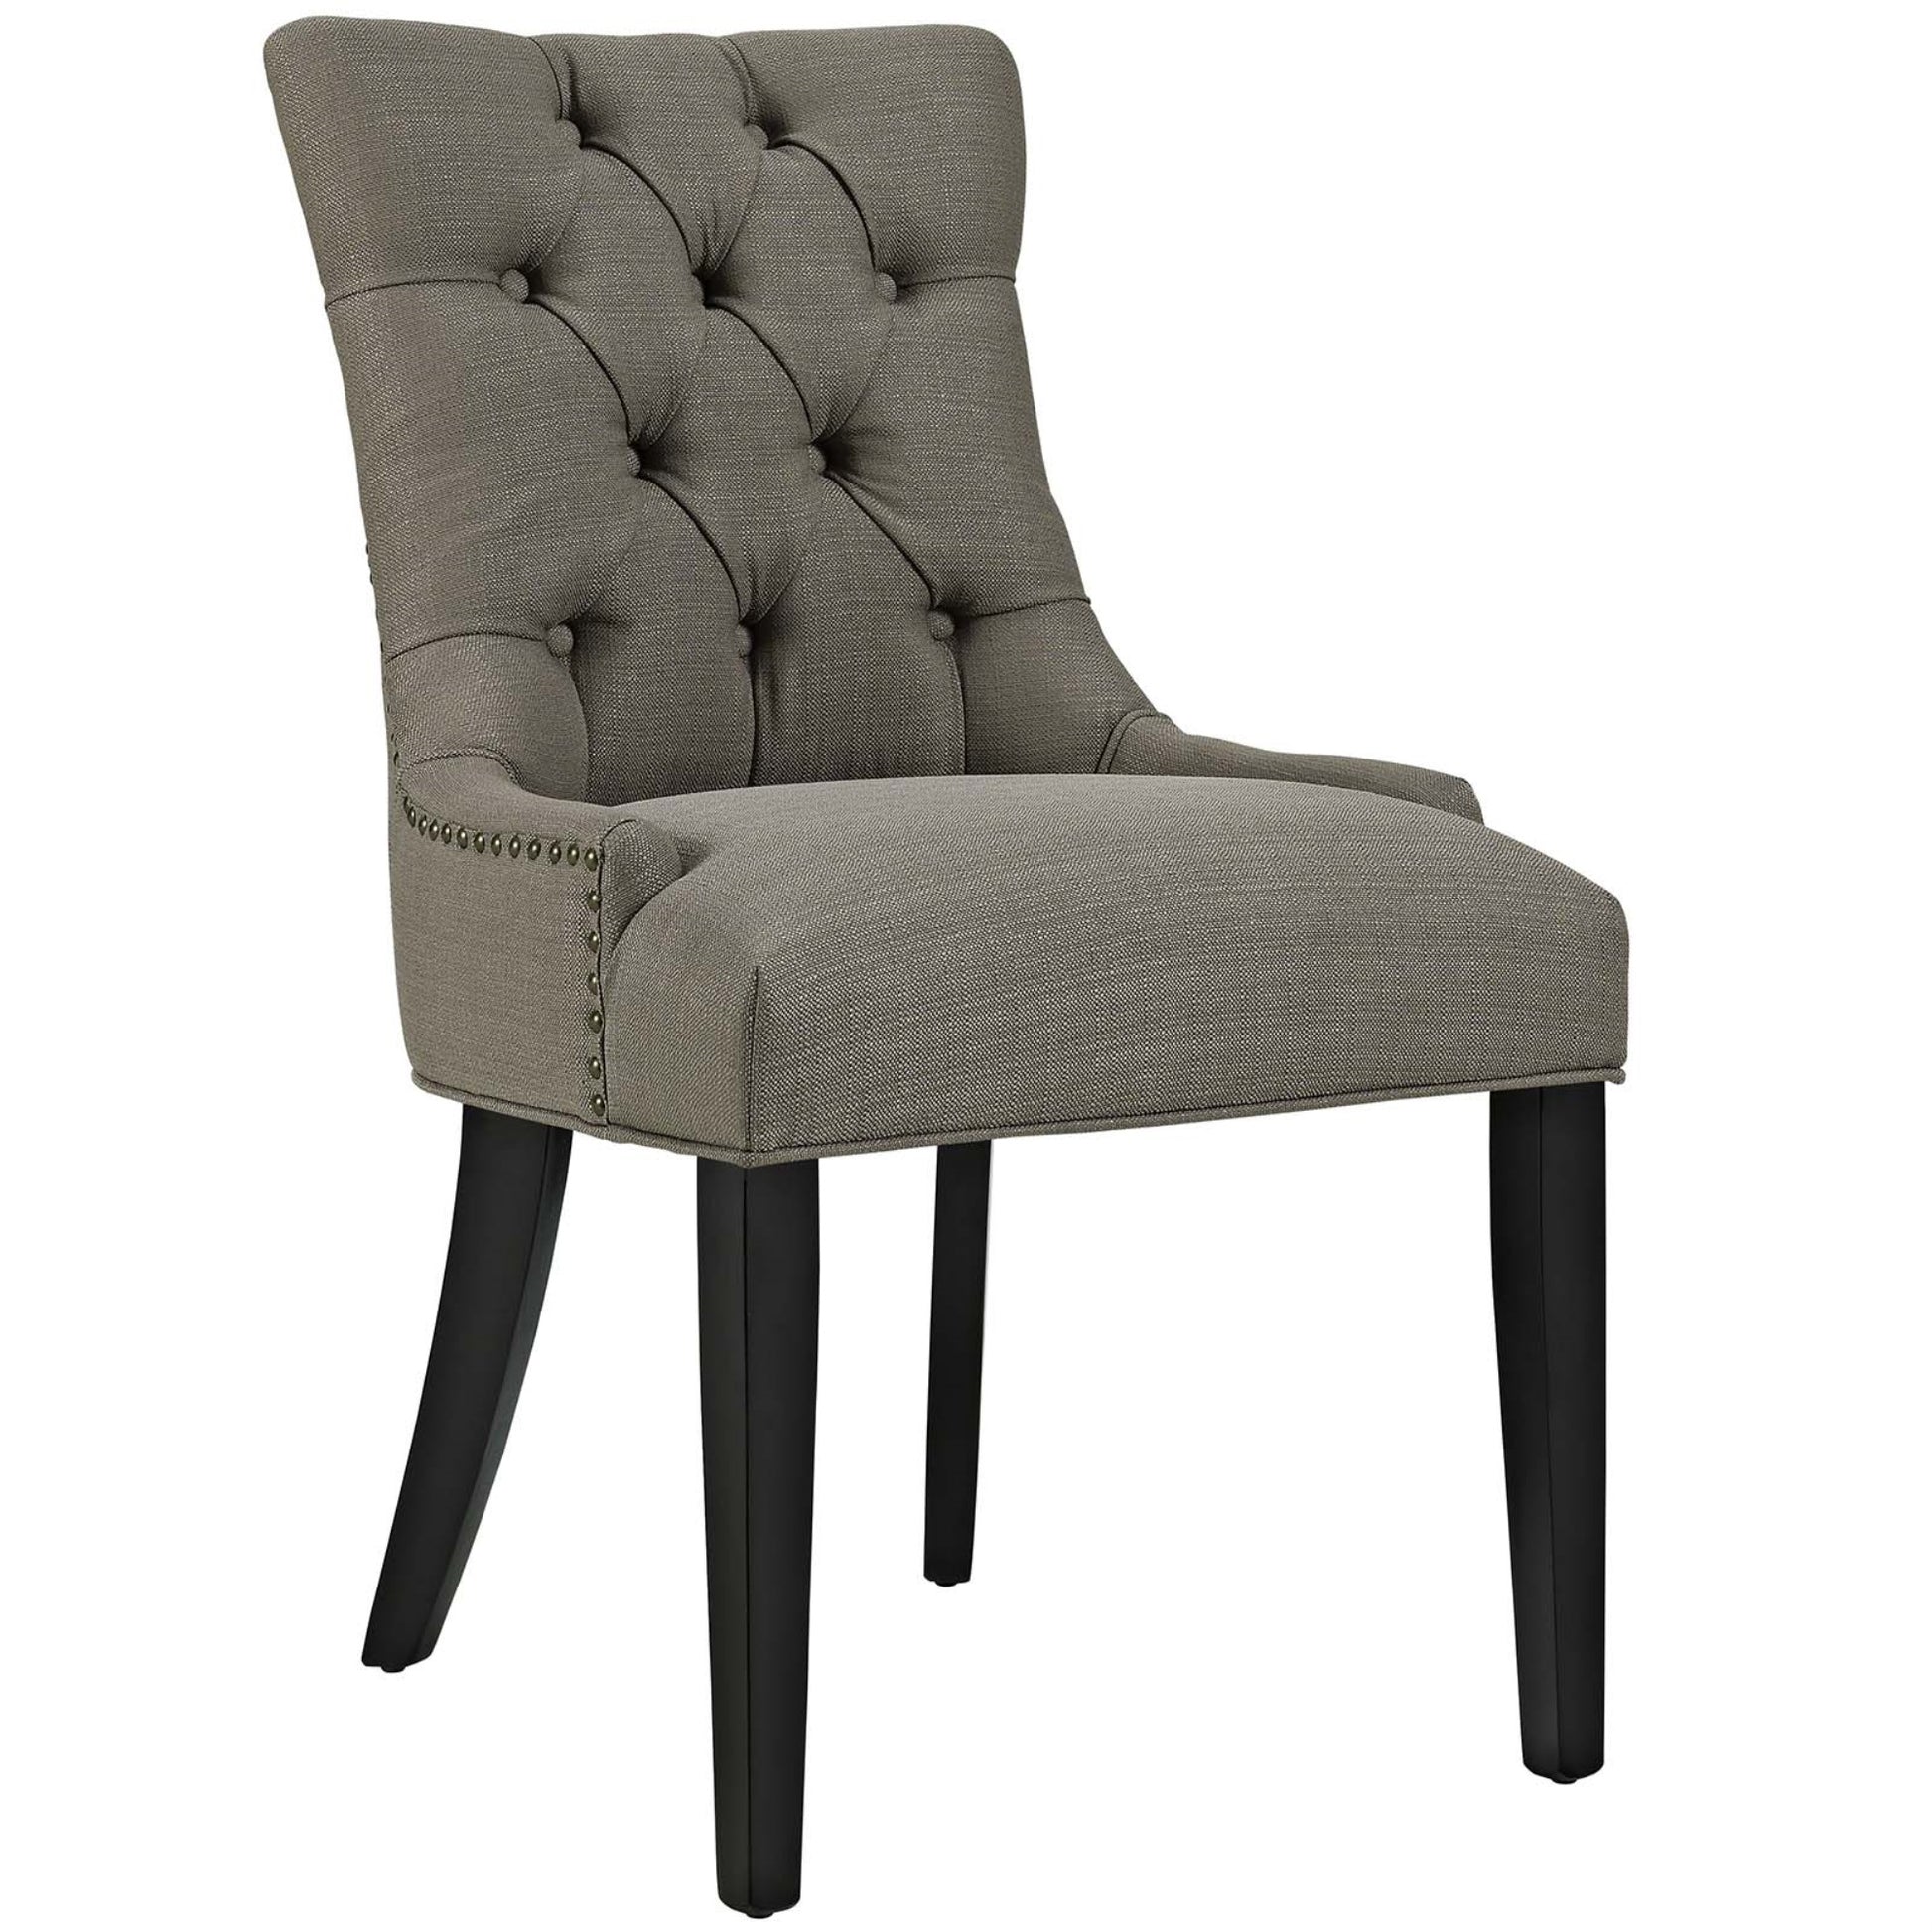 Ergode Regent Tufted Button Upholstered Fabric Parsons Dining Chair - Elegant and Comfortable with Nailhead Trim and Non-Marking Foot Caps - Granite